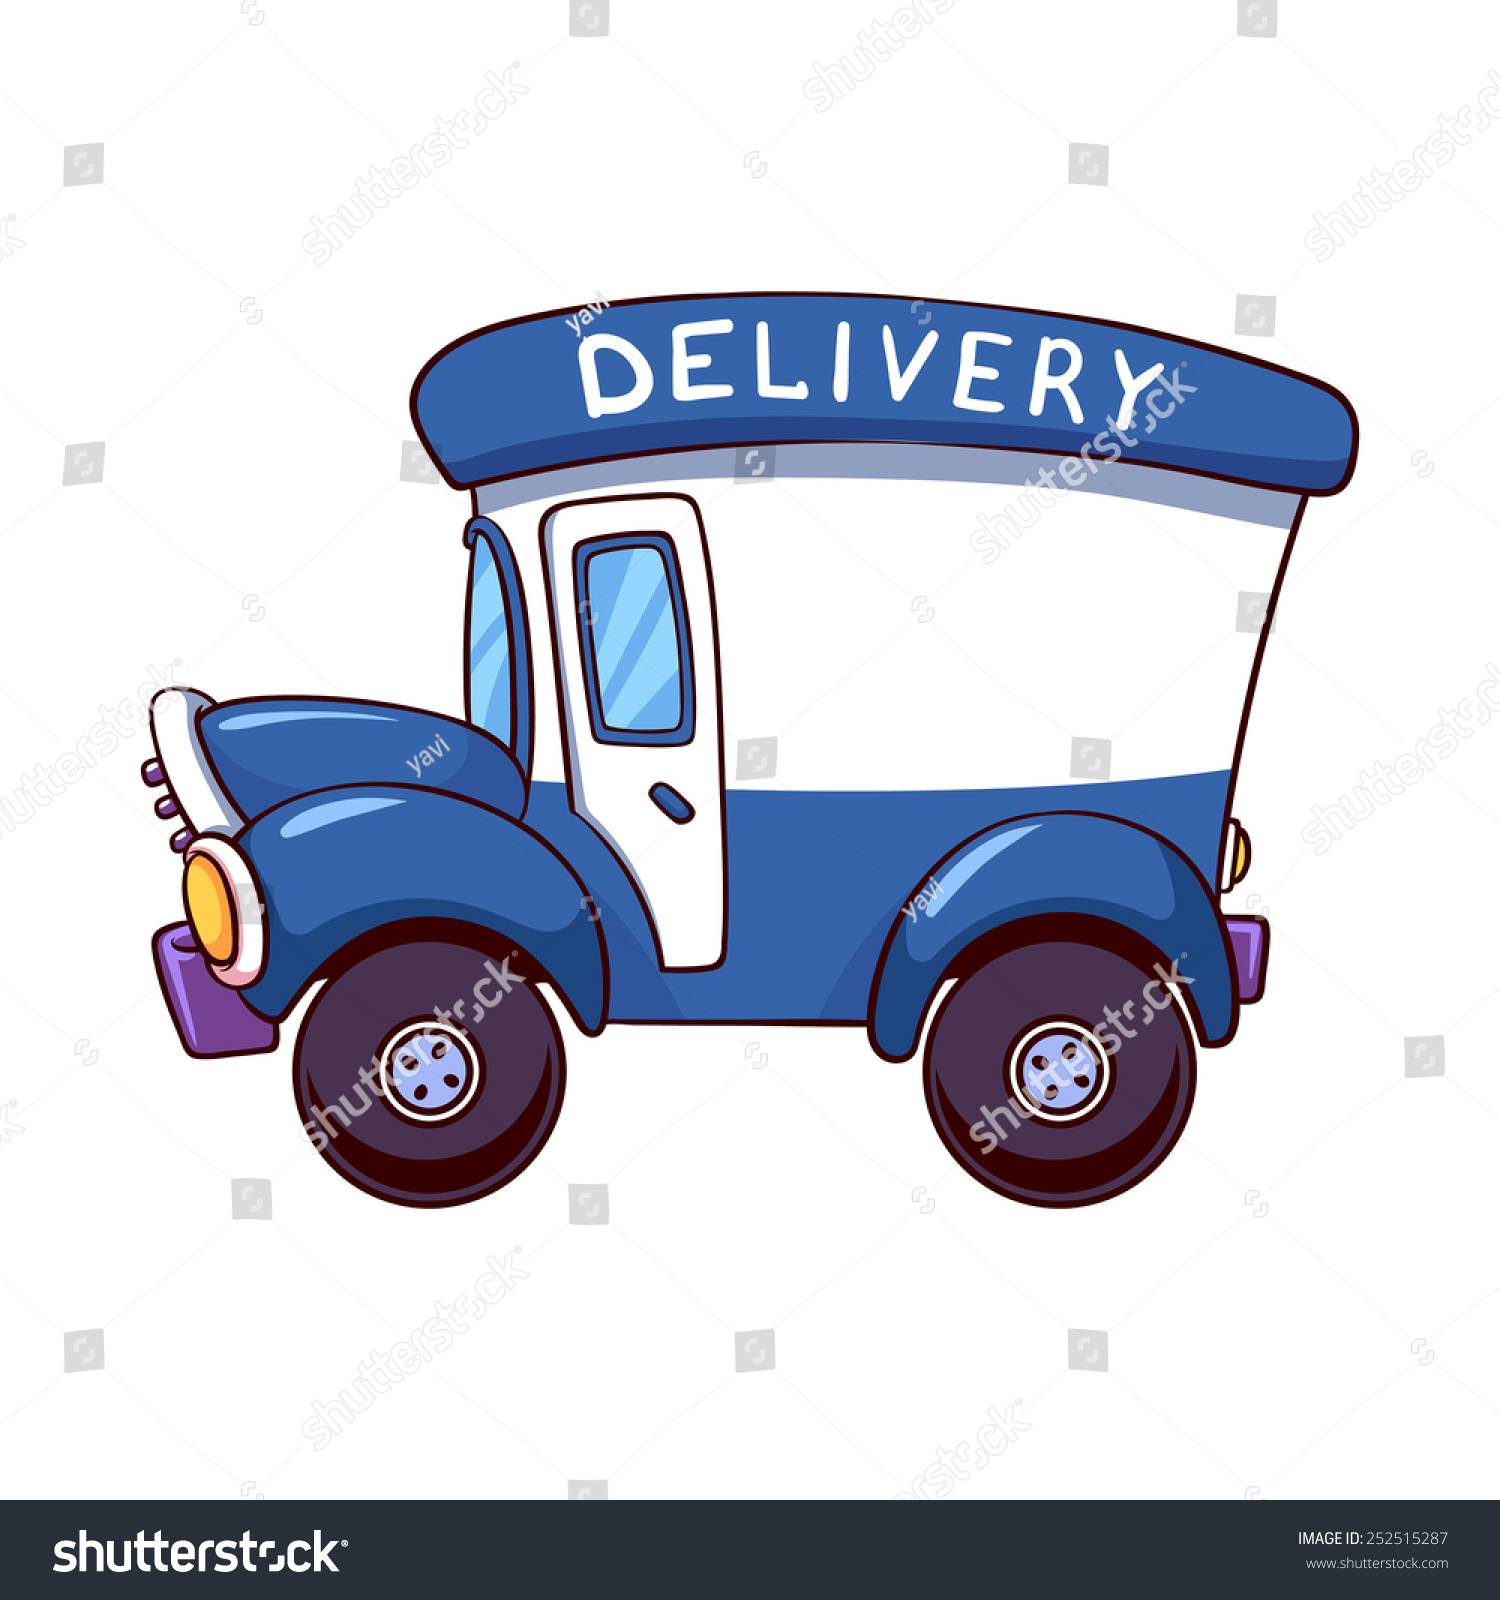 delivery truck clipart images - photo #18